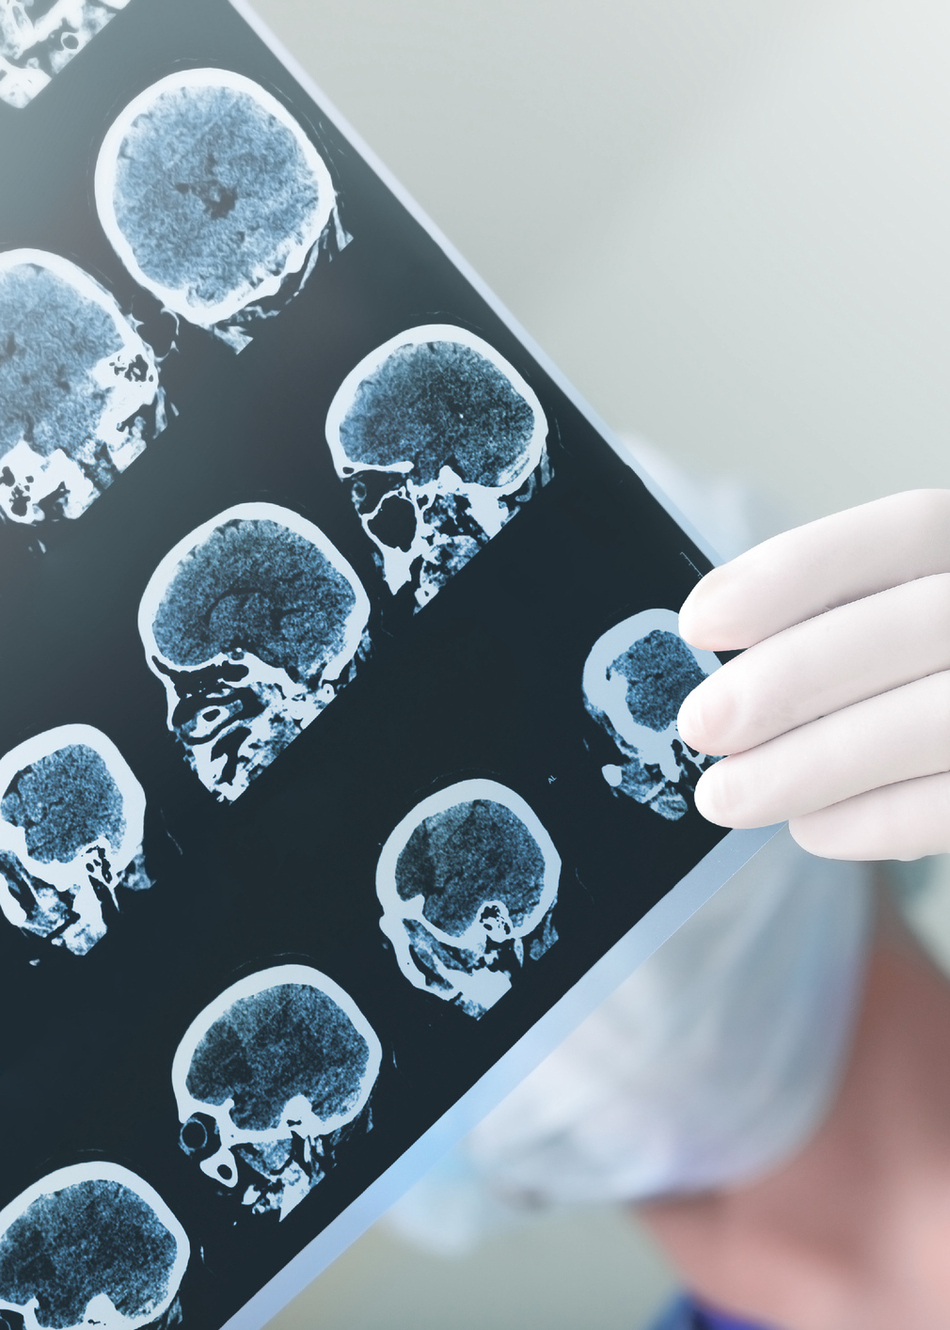 When Should a Meningioma Be Removed?